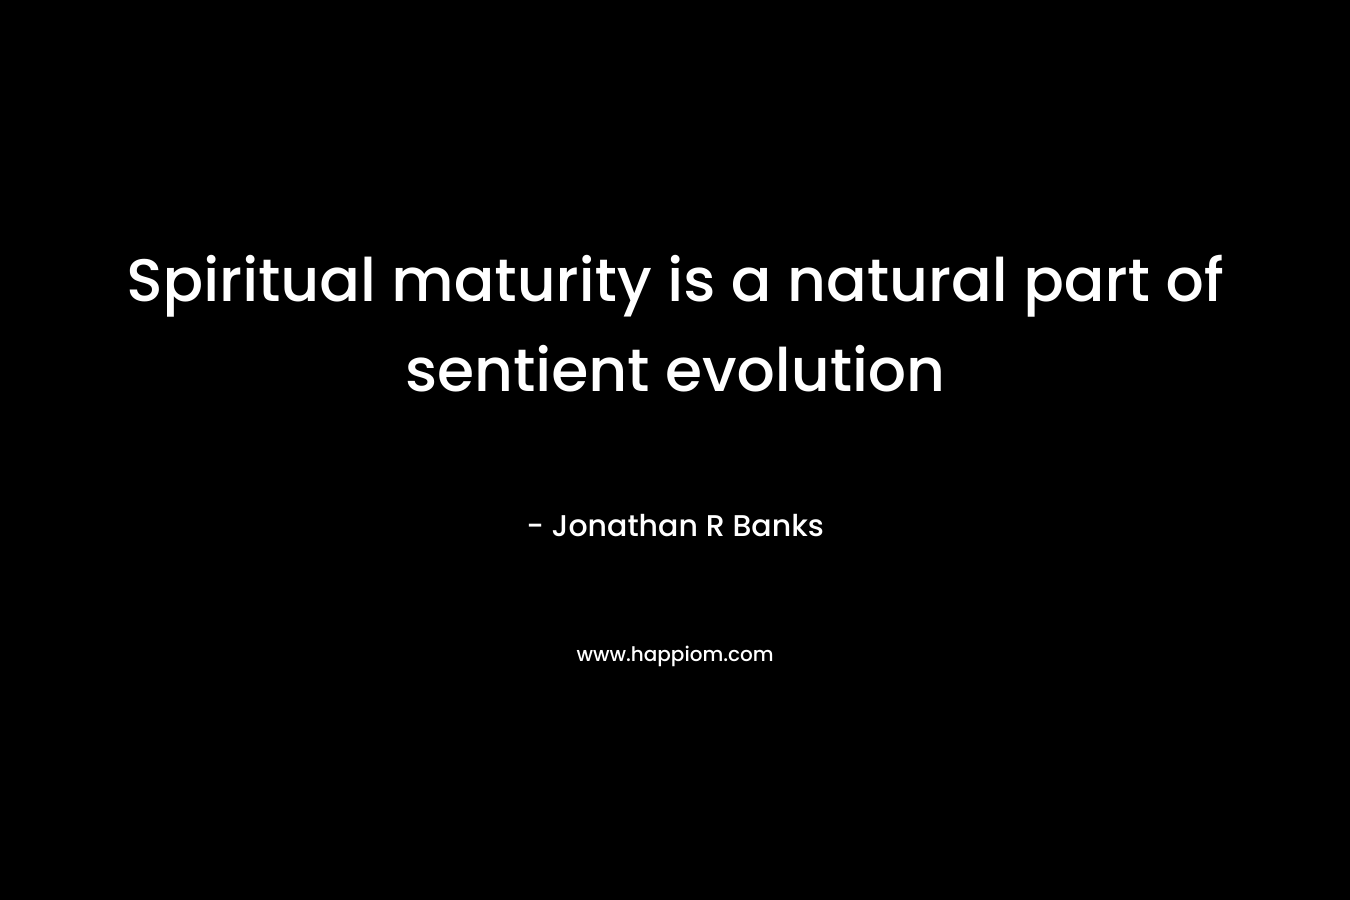 Spiritual maturity is a natural part of sentient evolution – Jonathan R Banks